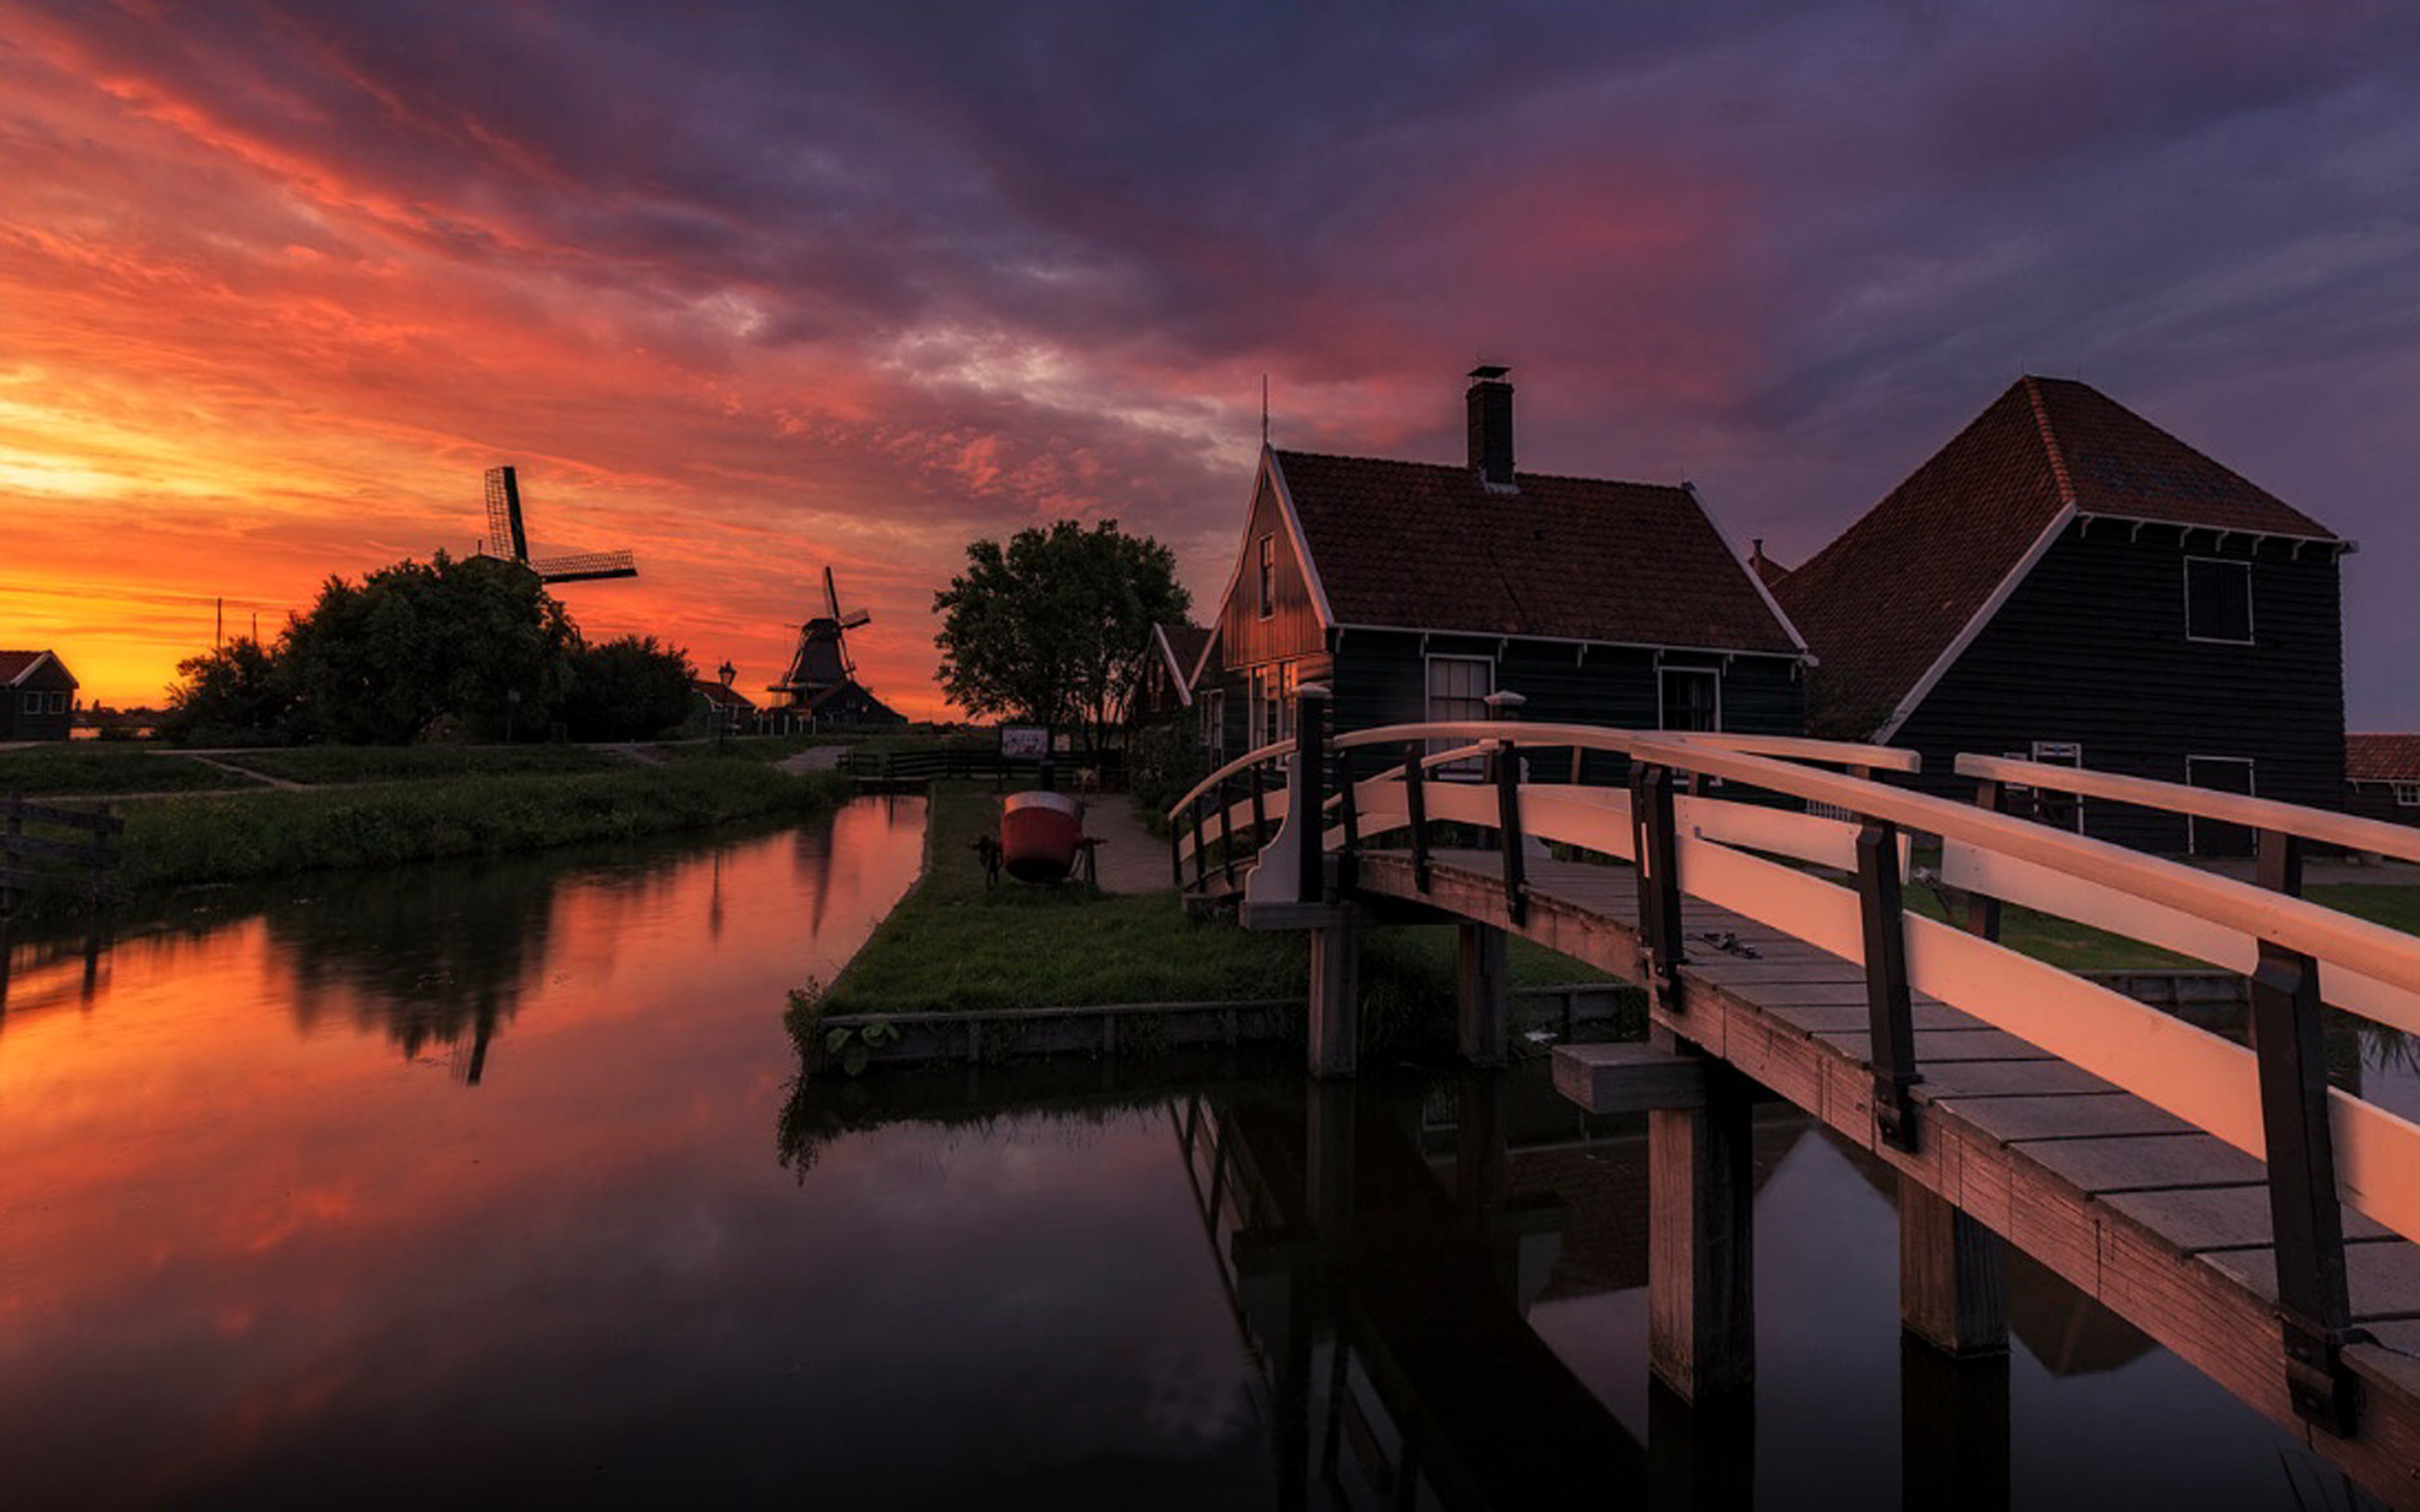 Farm in the Netherlands at Sunset